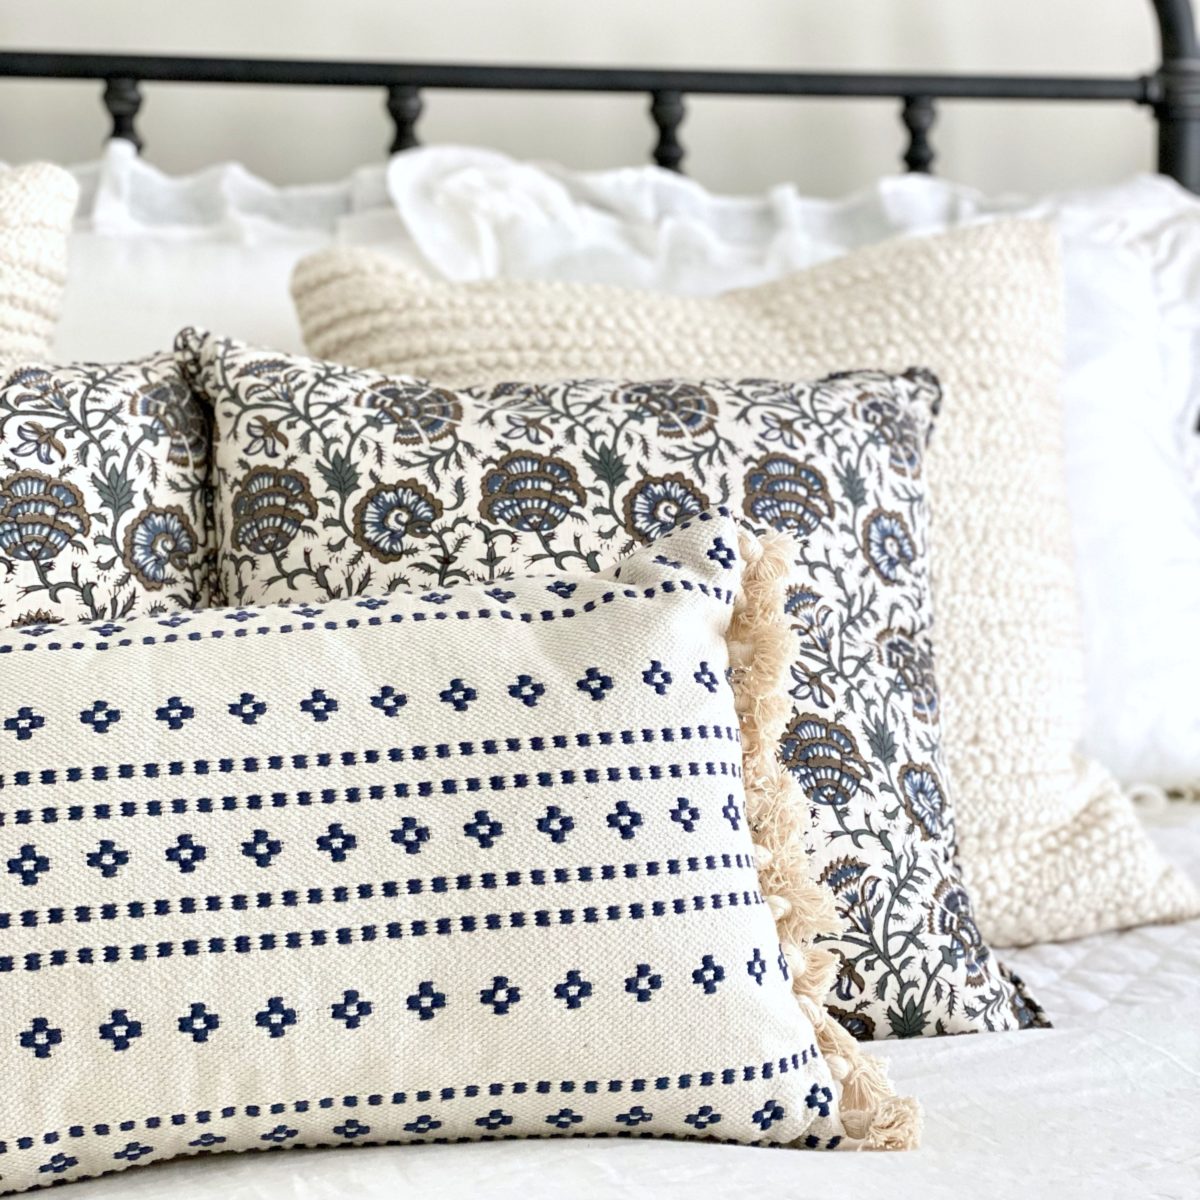 Blue and cream floral print pillows on the bed.